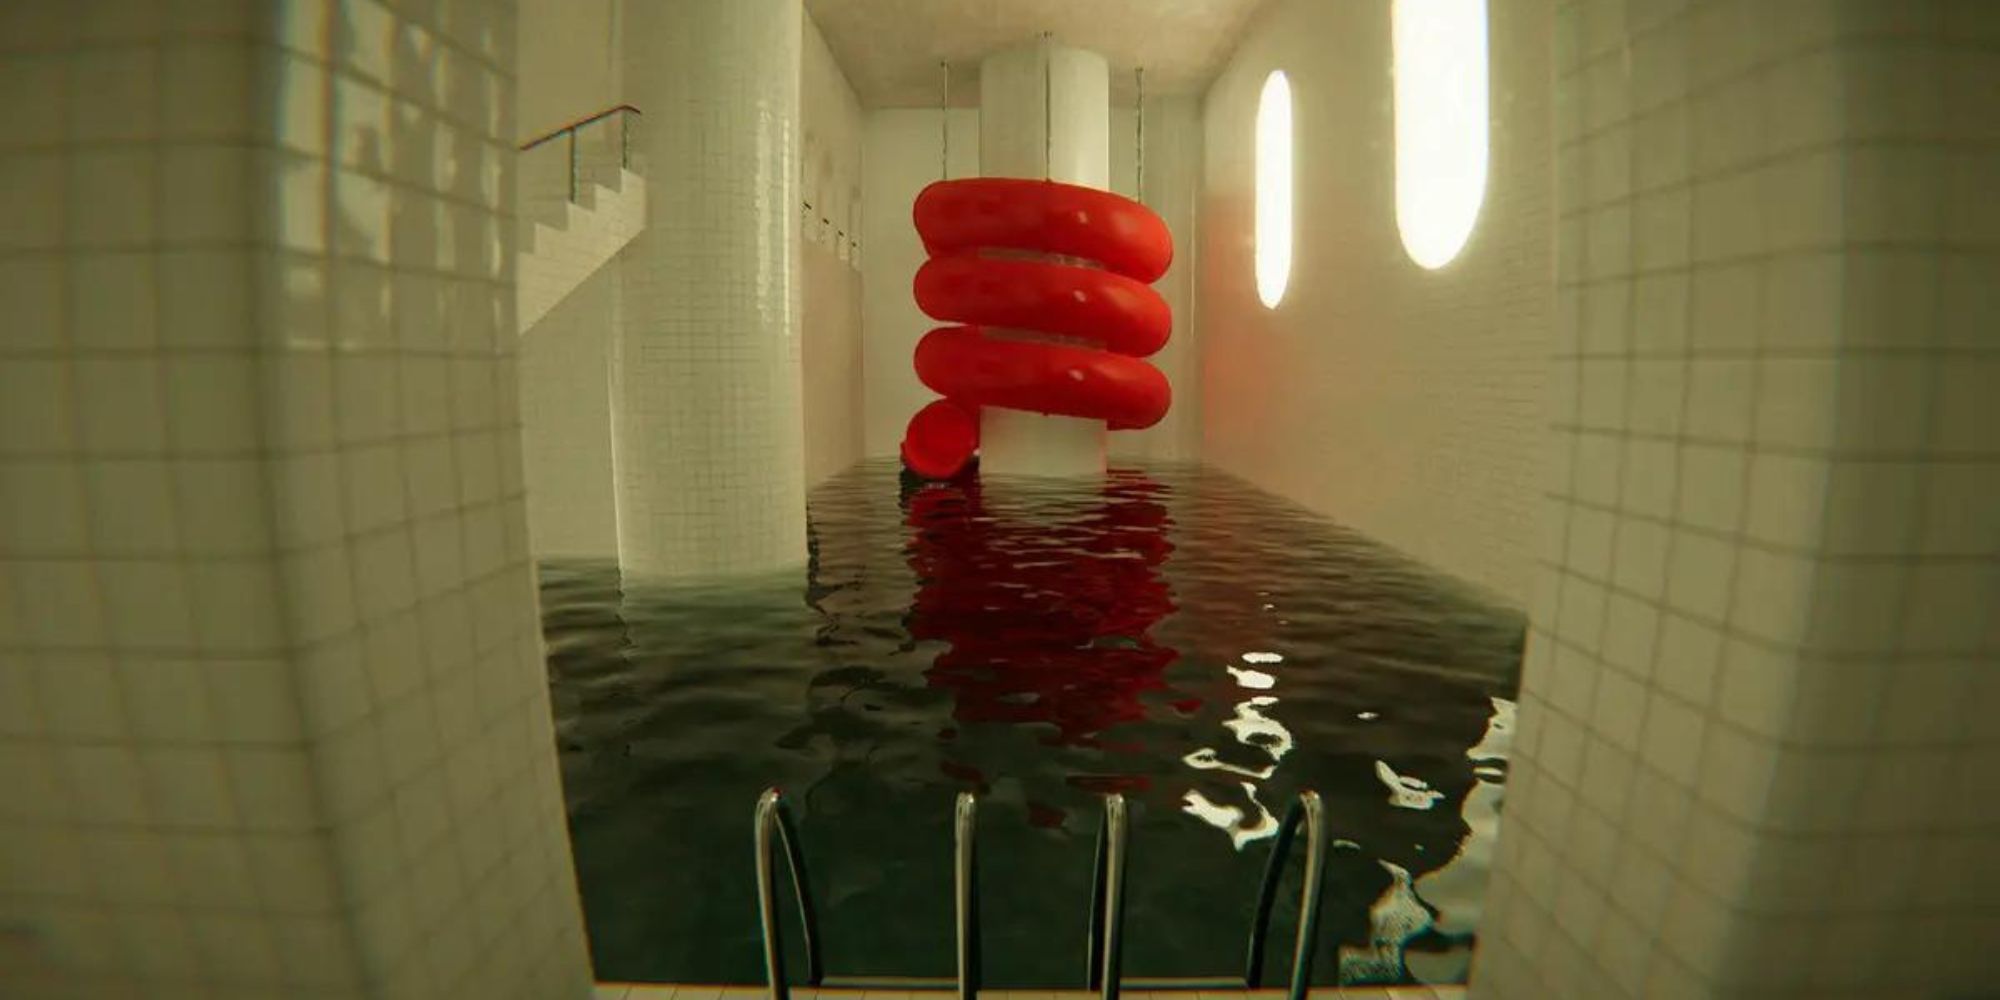 Still from Pools of a red flume wrapping around a white pillar within a swimming pool.